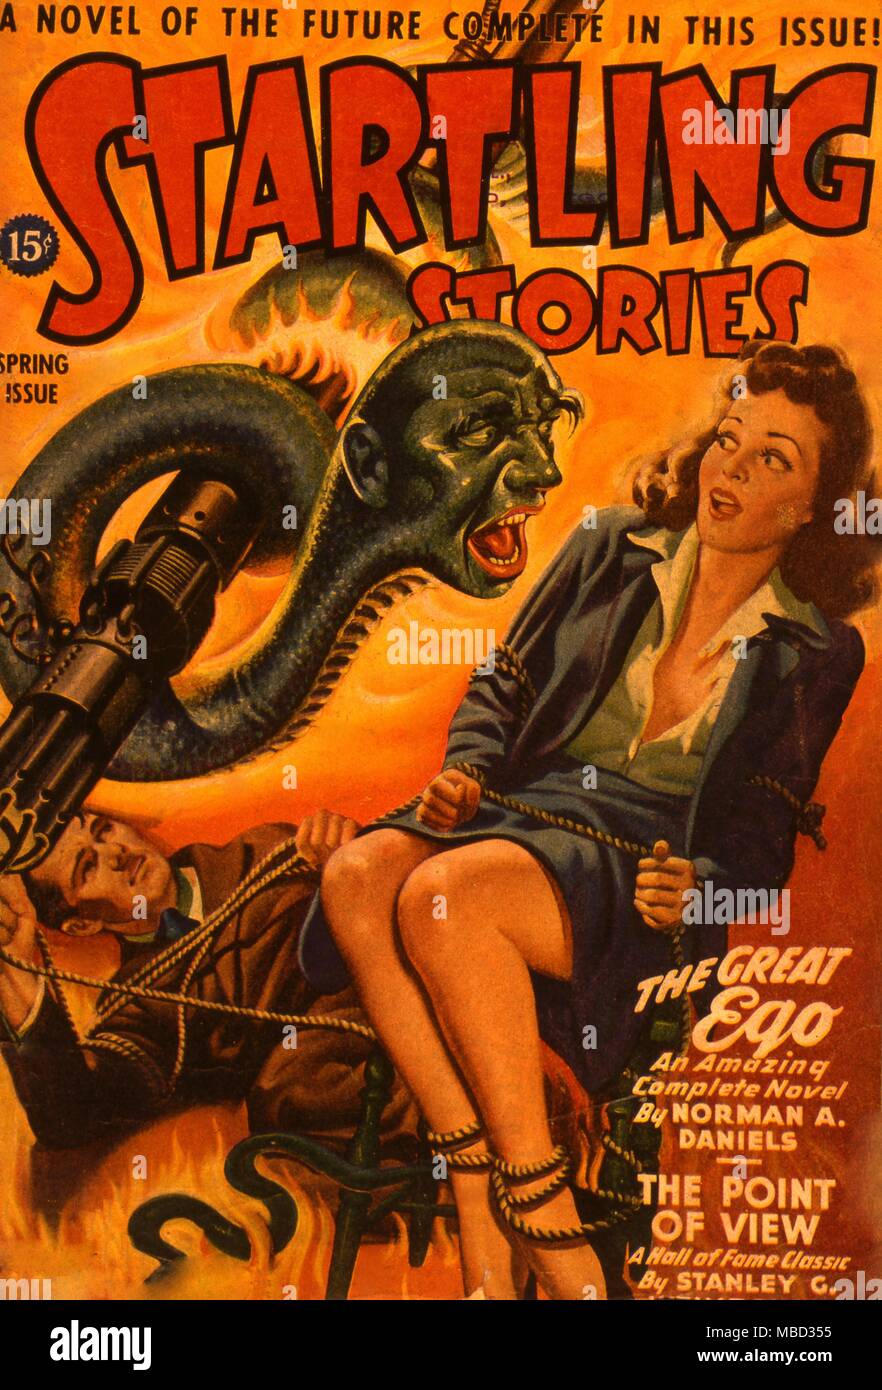 Science Fiction and Horror Magazines. 'Startling Stories' cover, Spring 1944. Artwork by Bergey Stock Photo